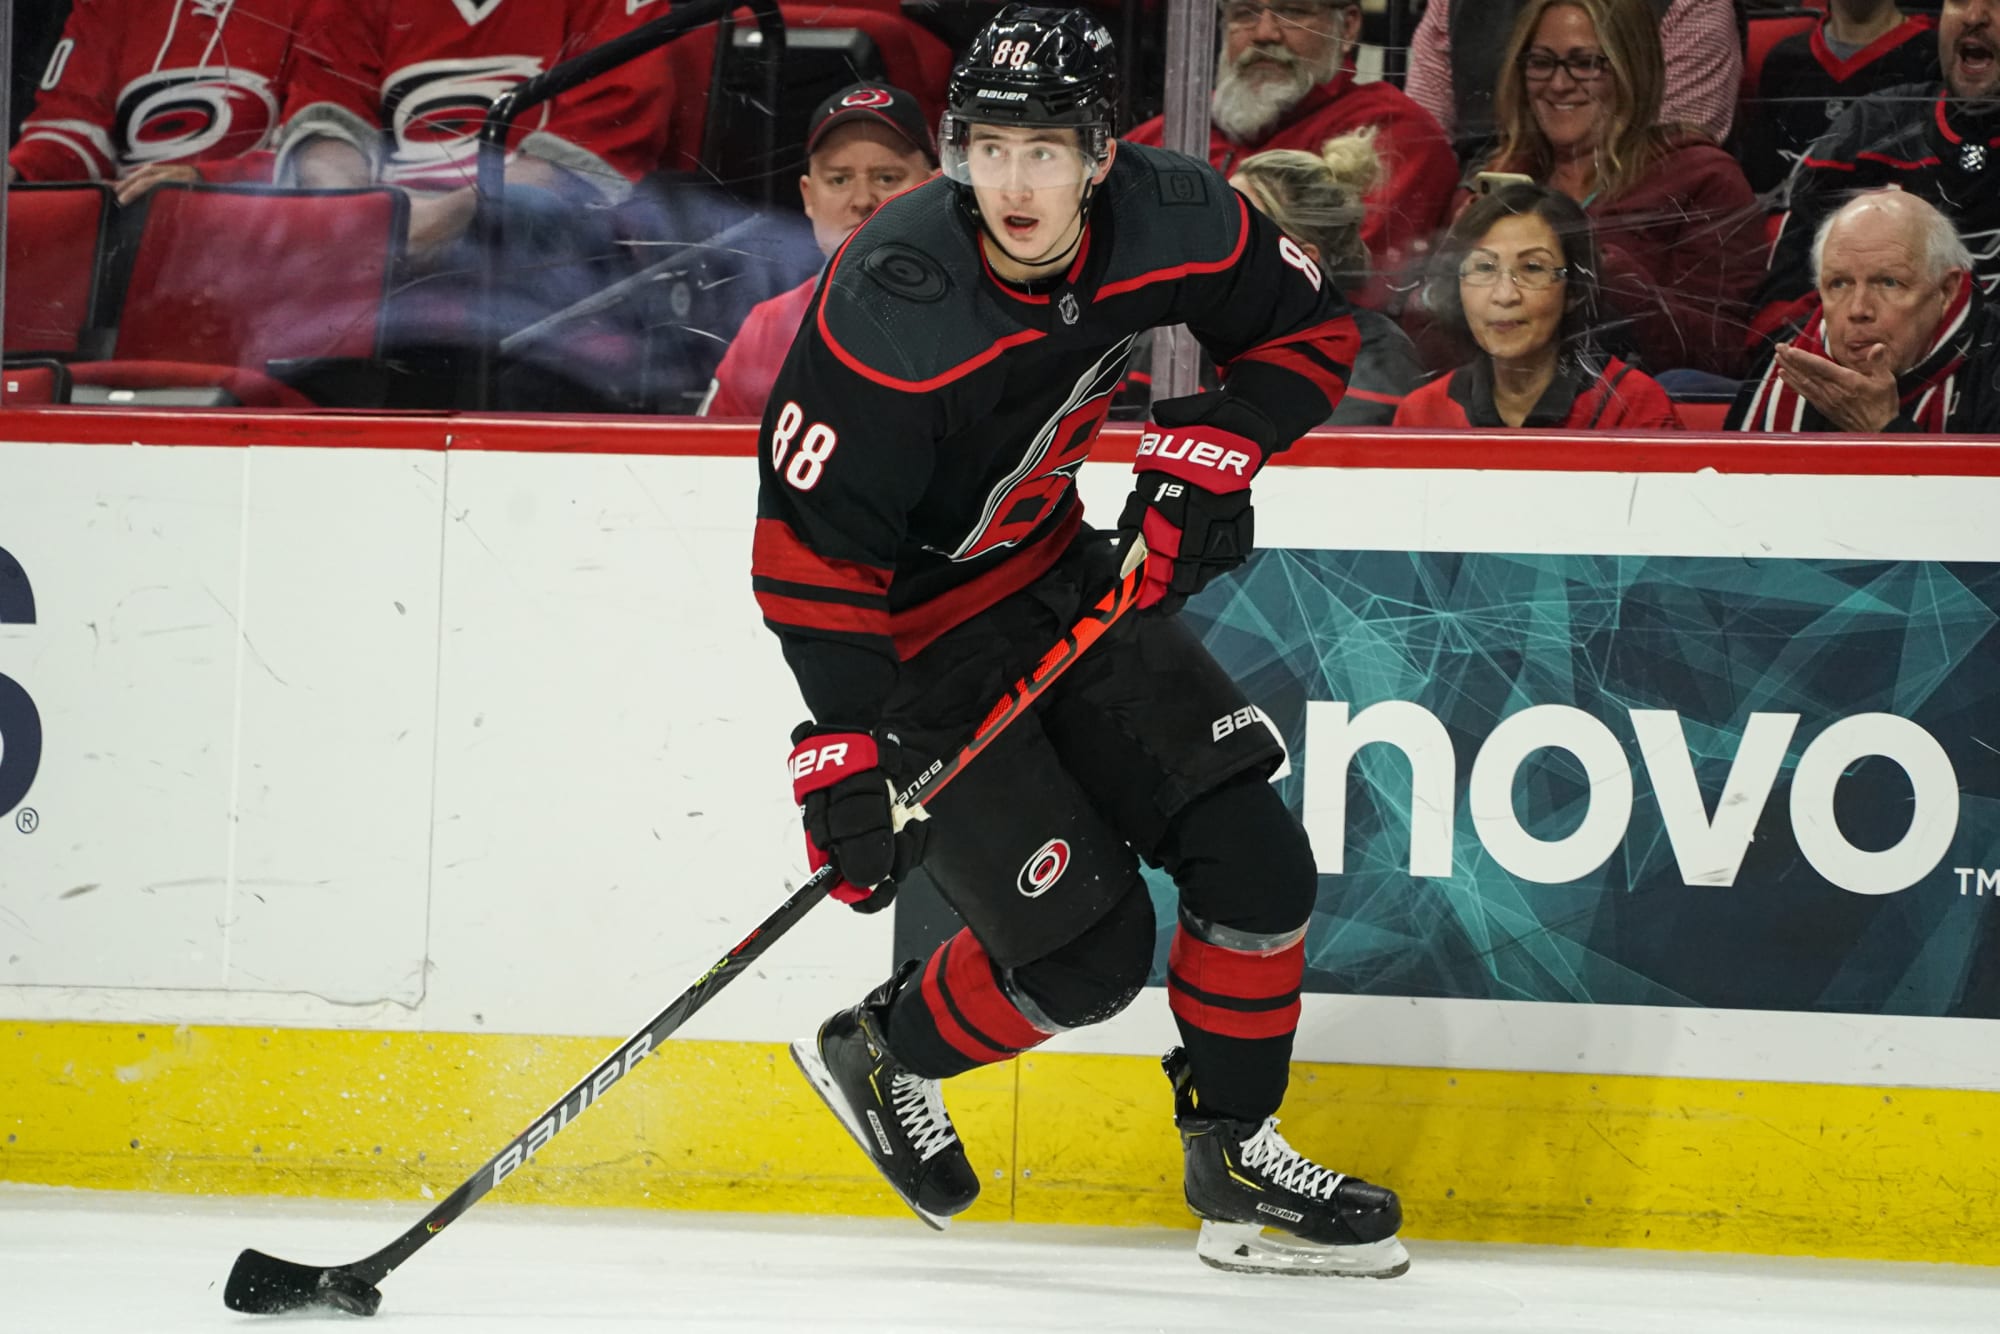 With NHL season approaching, is Carolina Hurricanes all-star